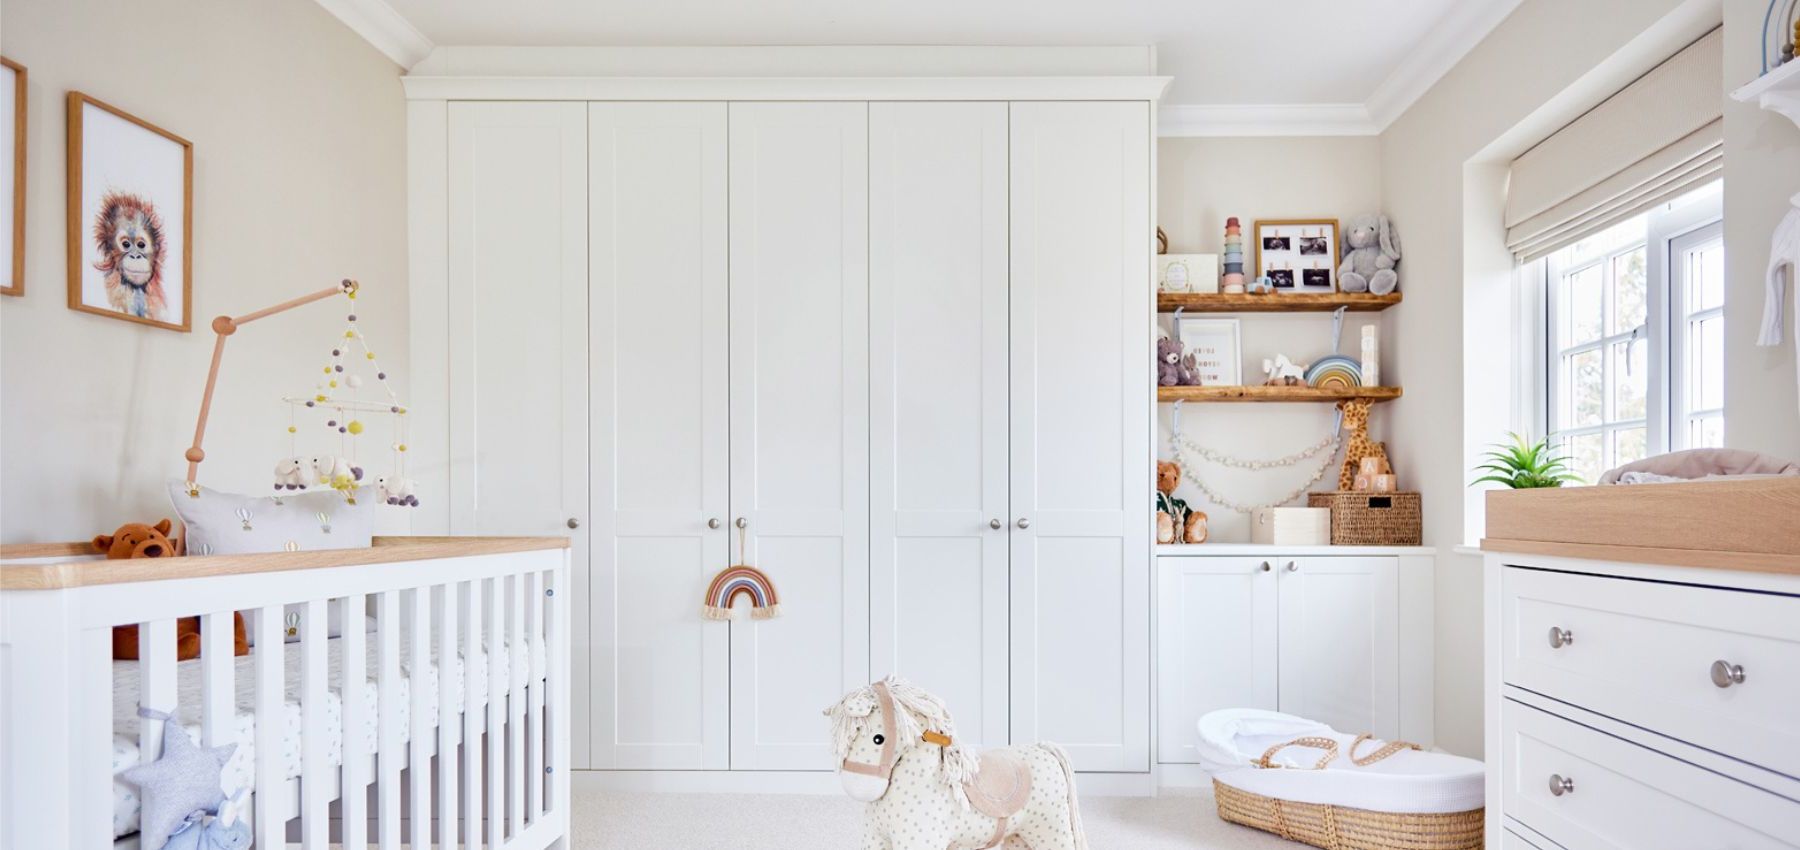 A Calming Nursery Space For Steph's Little Boy | Sharps Throughout Nursery Wardrobes (Gallery 1 of 20)